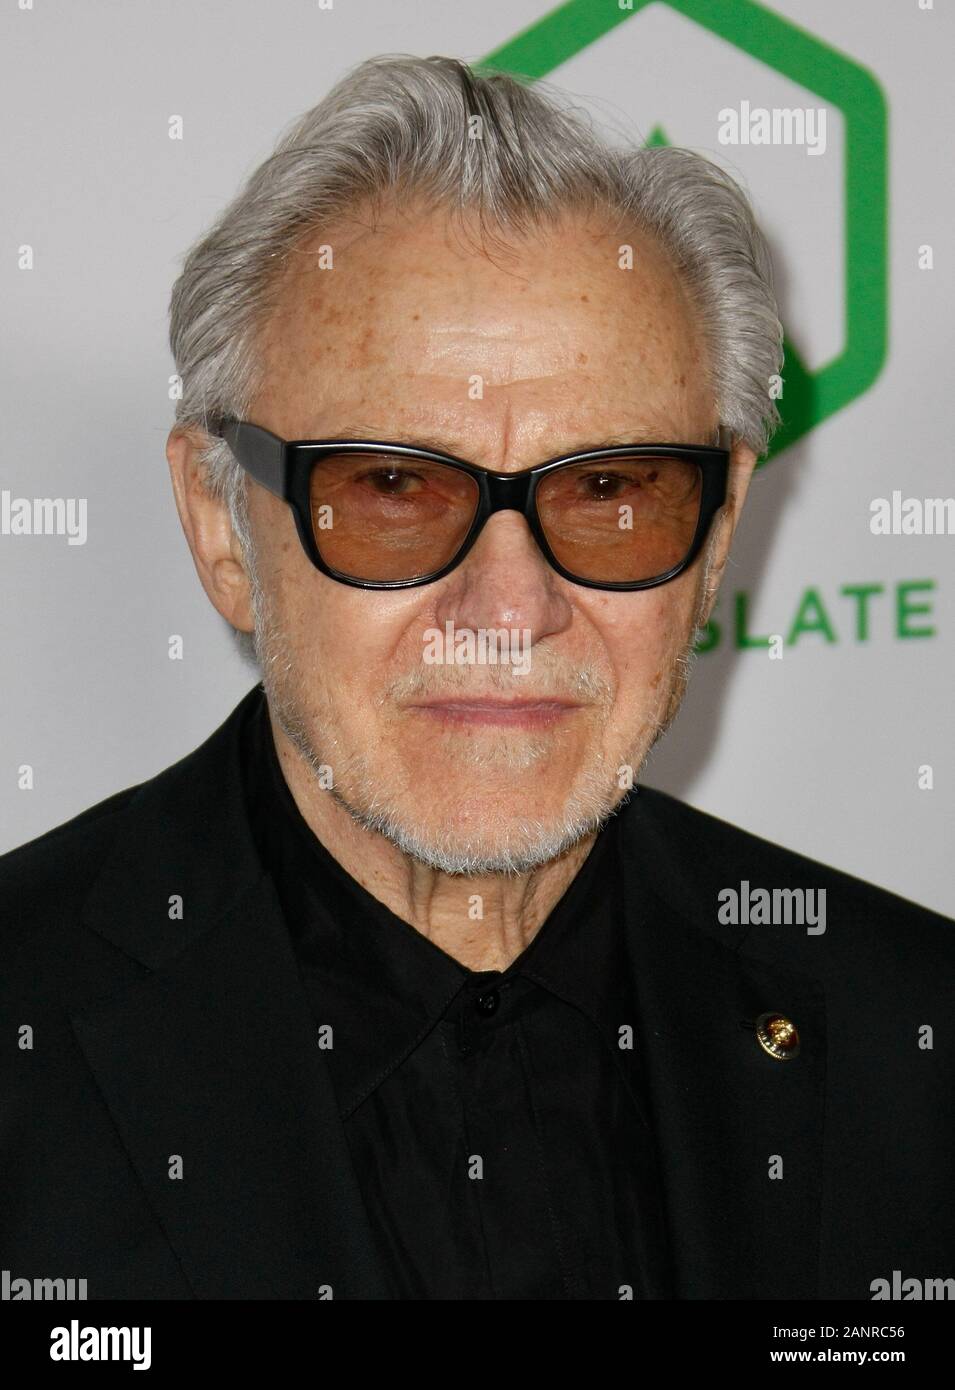 Hollywood, USA. 18th Jan, 2020. LOS ANGELES, CALIFORNIA - JANUARY 18: Harvey Keitel attends the 31st Annual Producers Guild Awards at Hollywood Palladium on January 18, 2020 in Los Angeles, California. Photo: CraSH/imageSPACE Credit: Imagespace/Alamy Live News Stock Photo